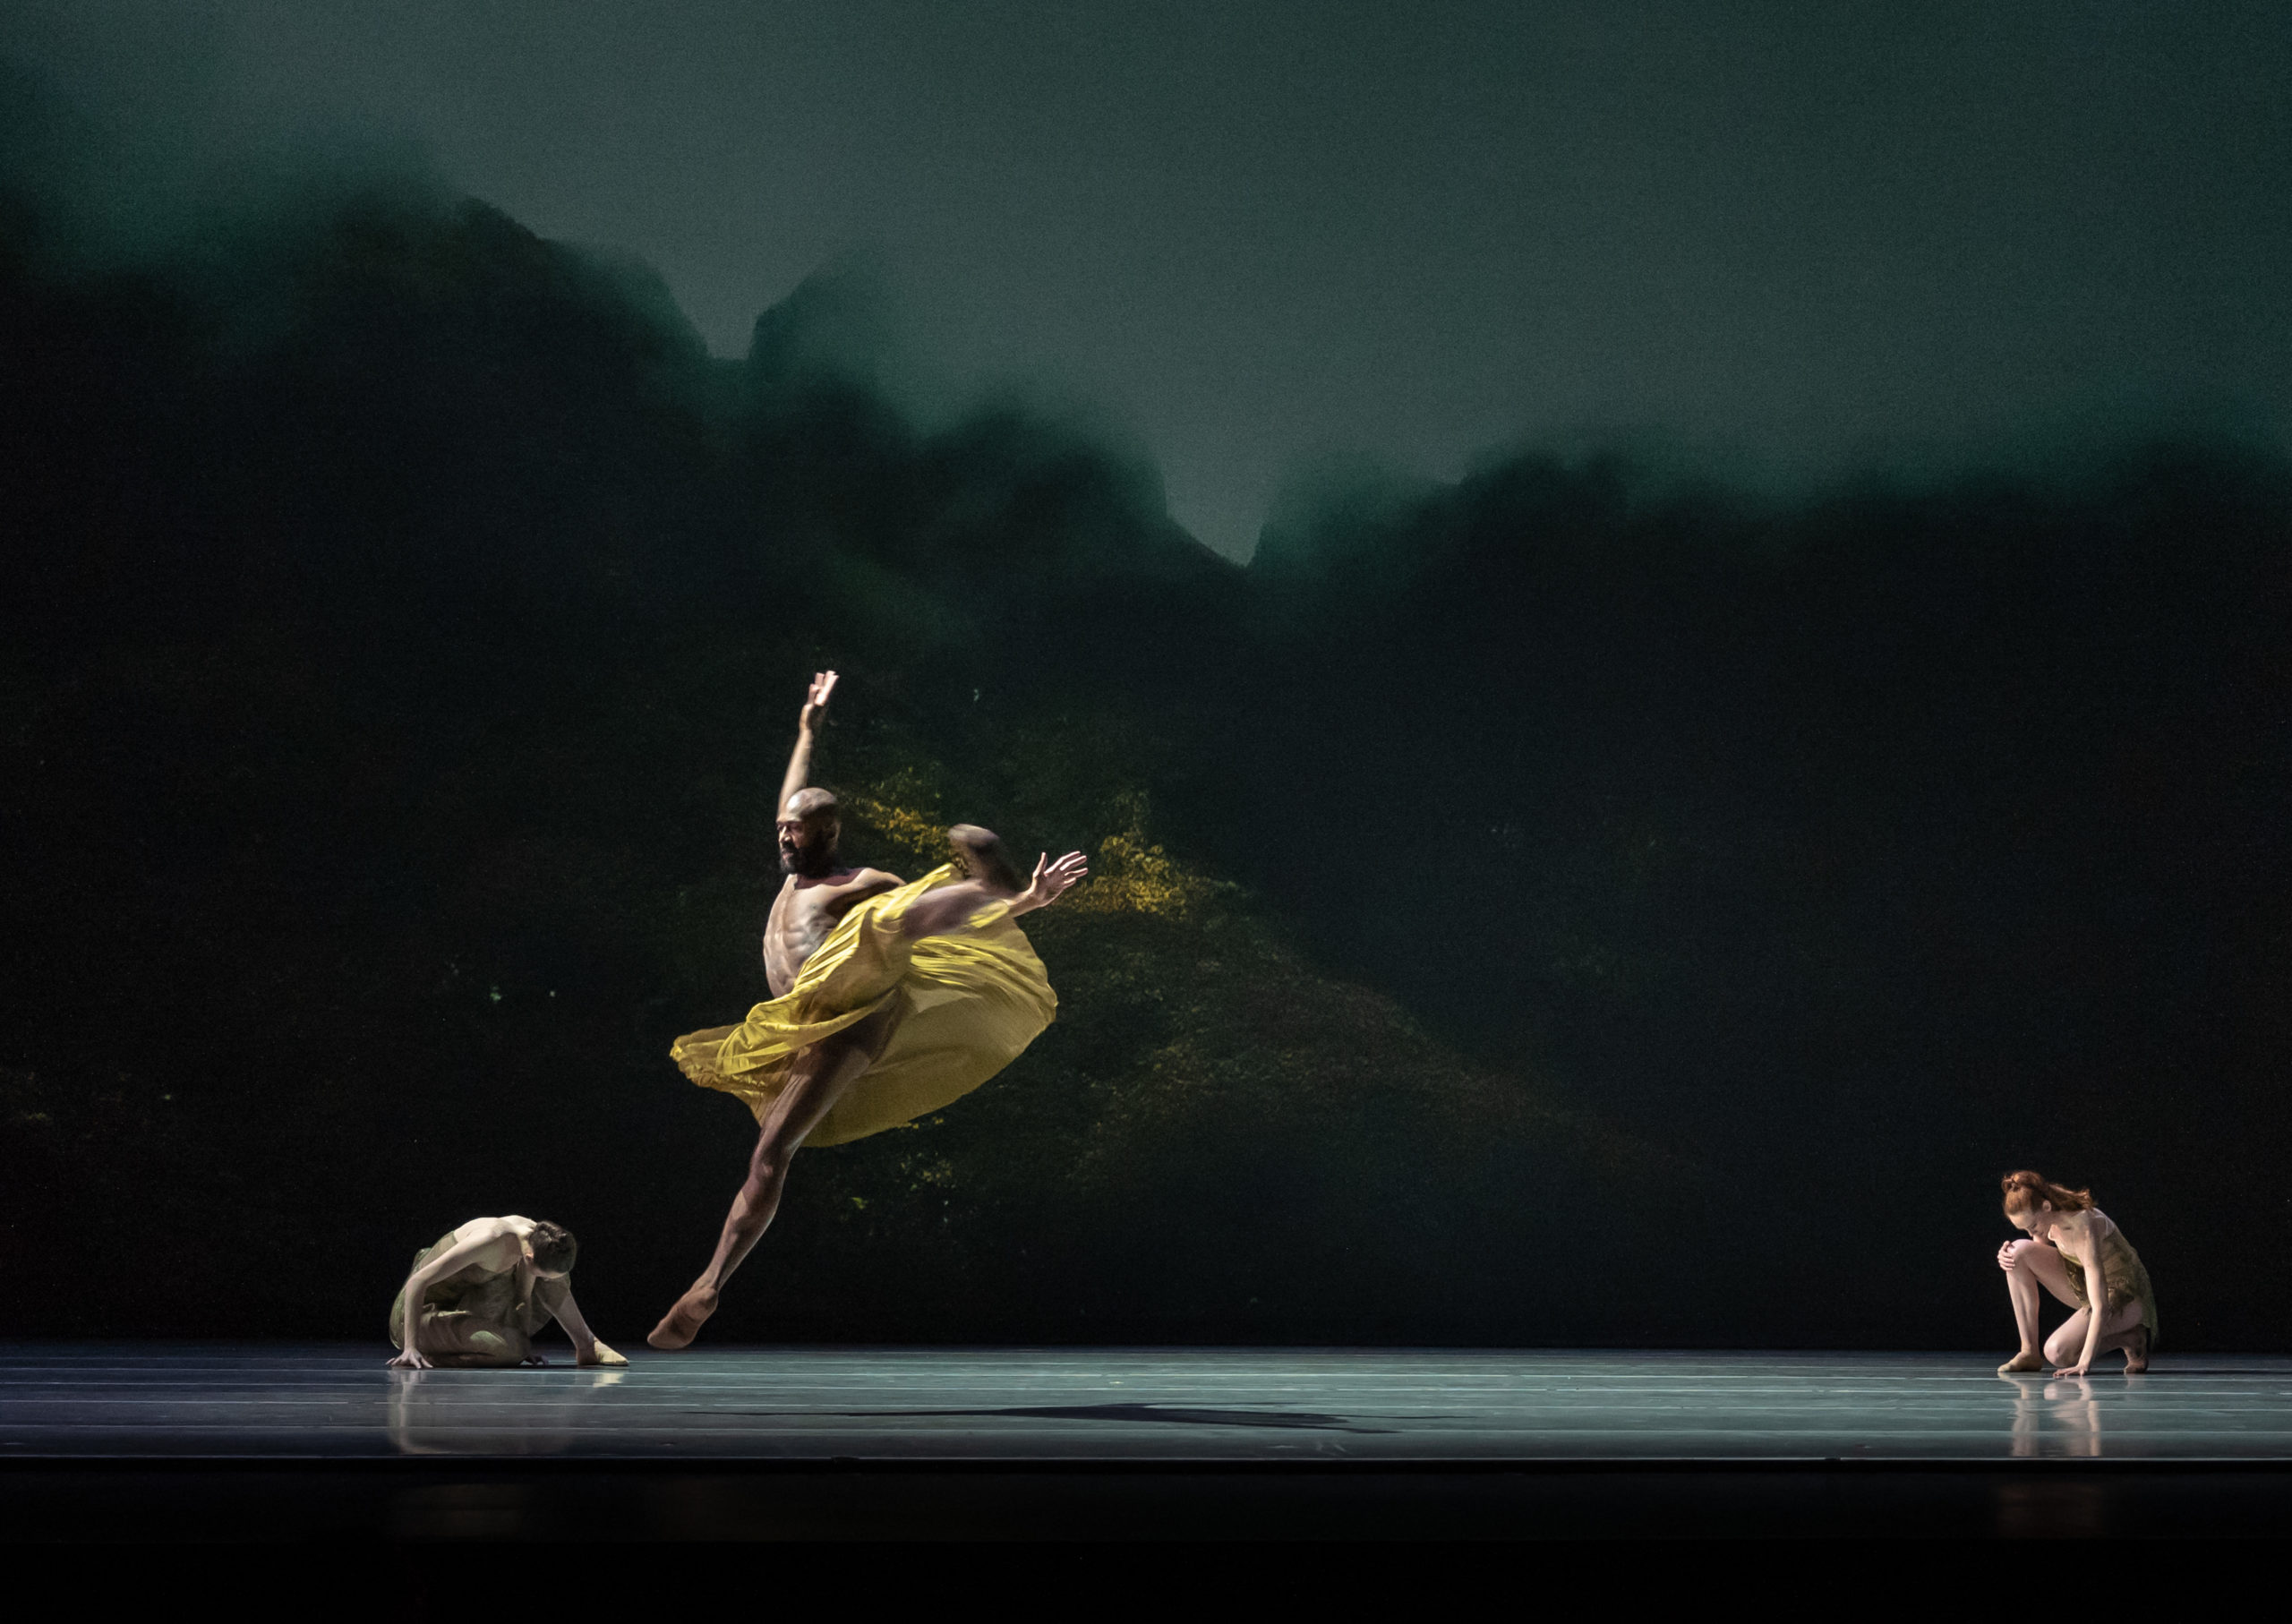 LINES Ballet company artist Madeline DeVries, Maya Harr, and Babatunji Johnson performing on stage in Alonzo King's POLE STAR